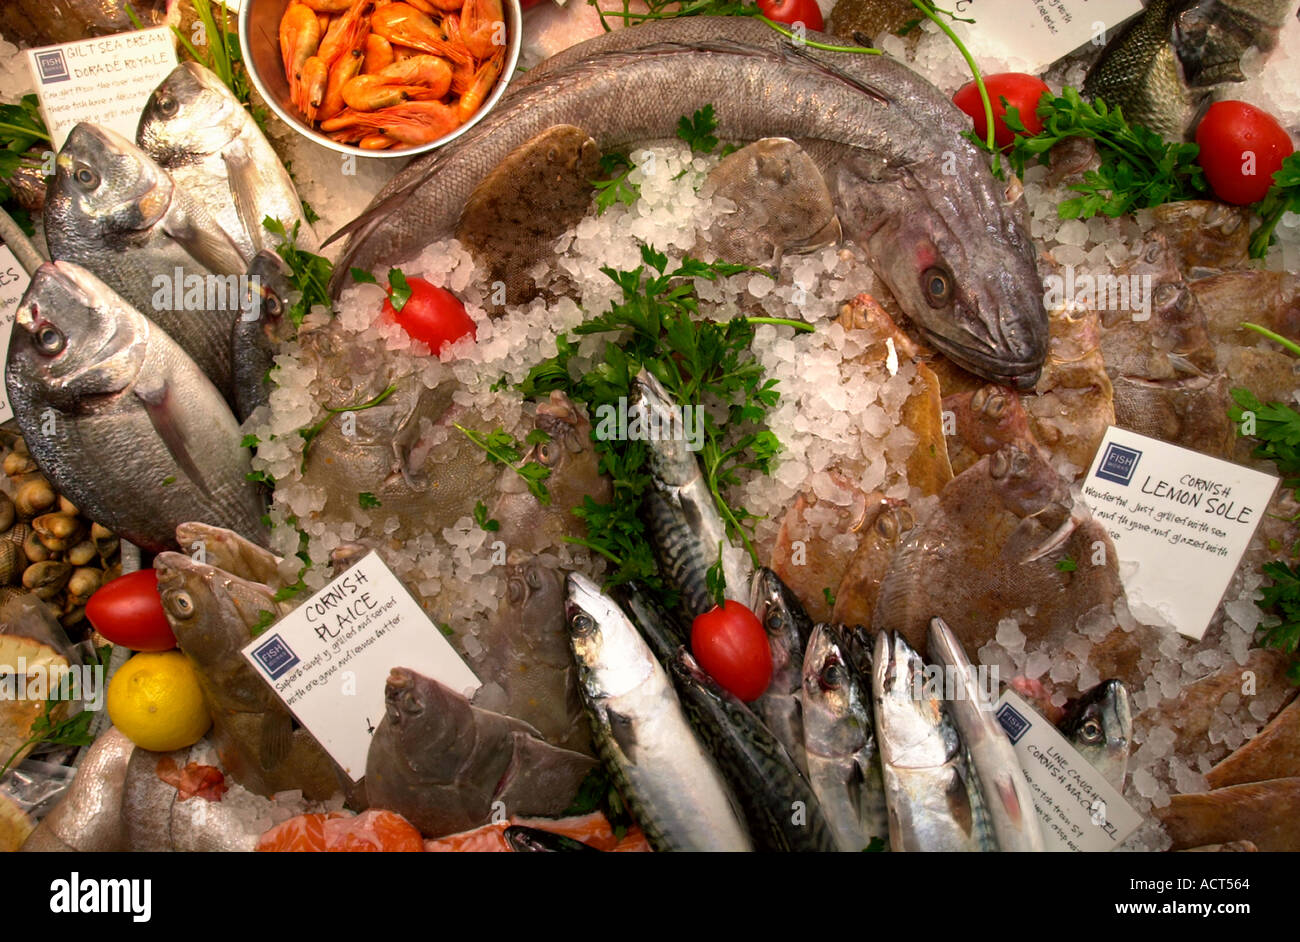 FISH WORKS TRADITIONAL FISHMONGERS AND THE GREEN STREET SEAFOOD CAFE IN BATH UK Stock Photo